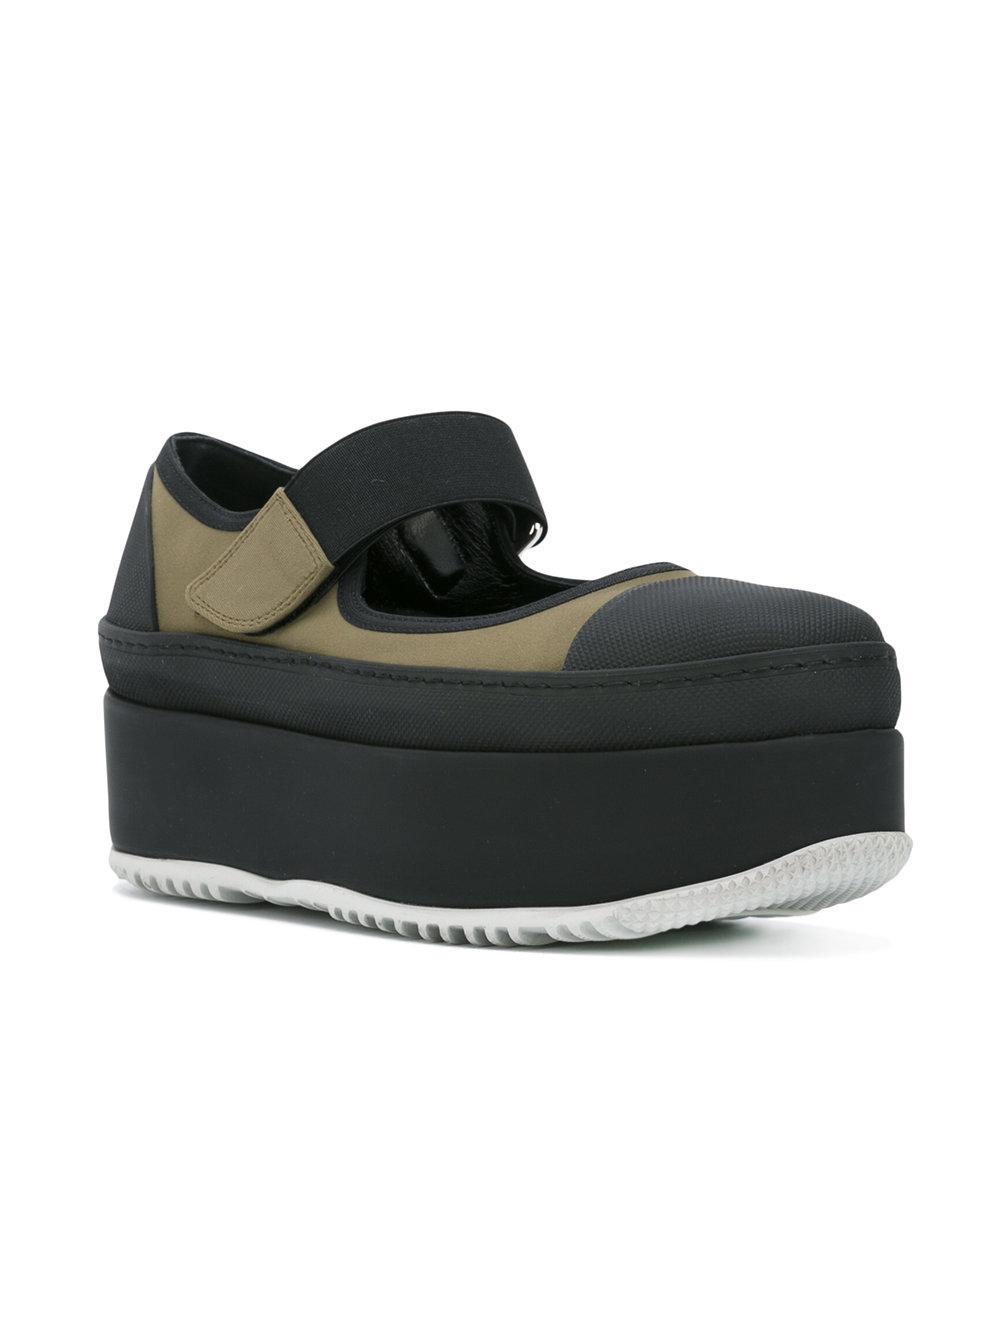 Marni Platform Mary Jane Sneakers in Green | Lyst